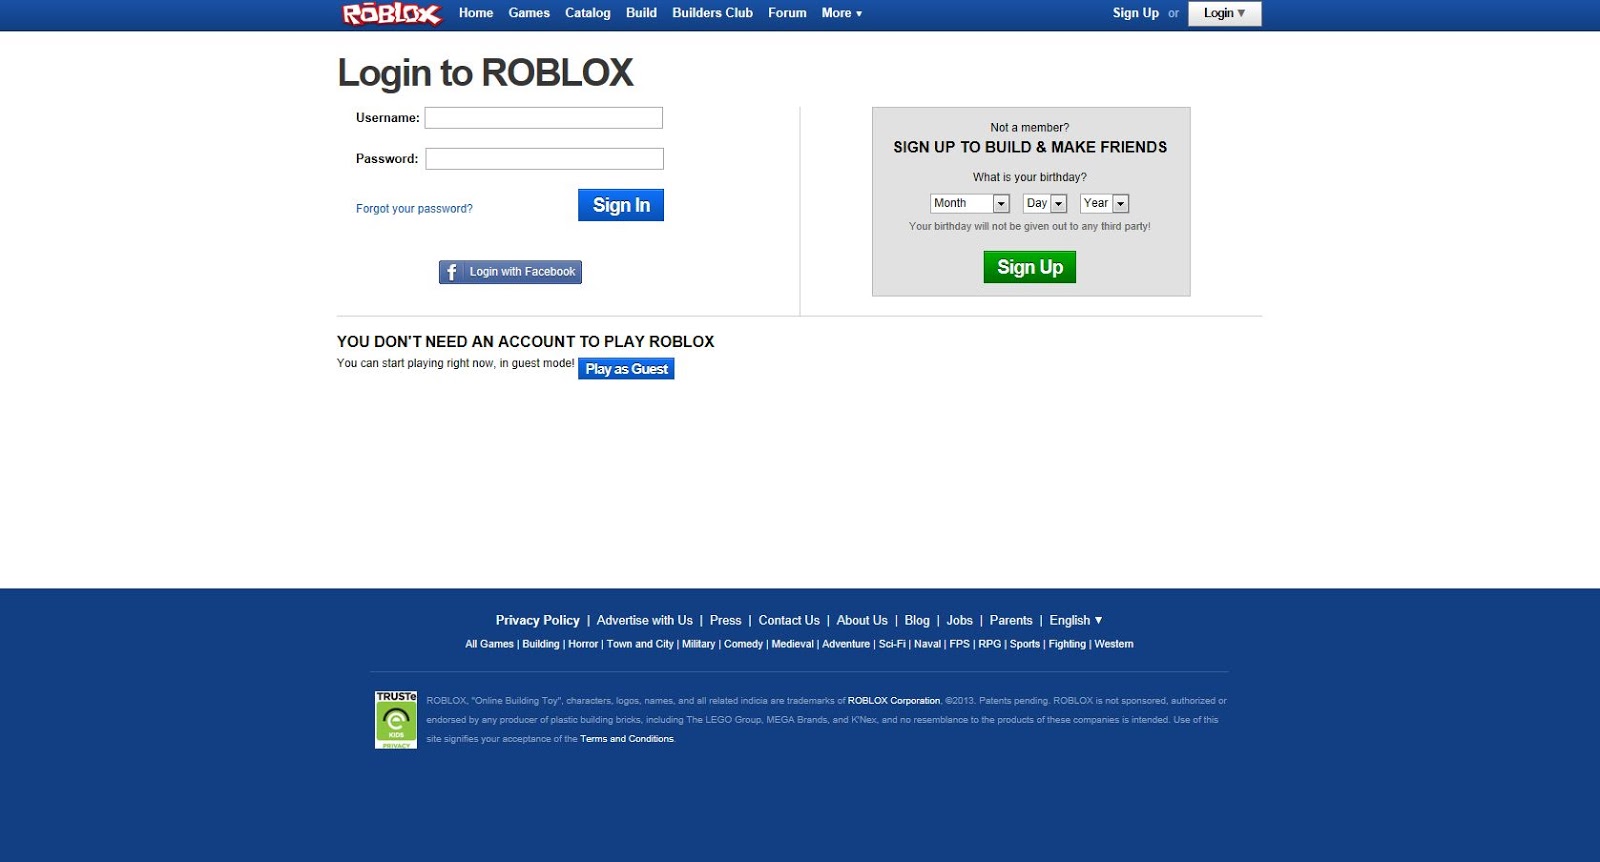 Unofficial Roblox Roblox Blue Panel Update On Website - roblox login in screen